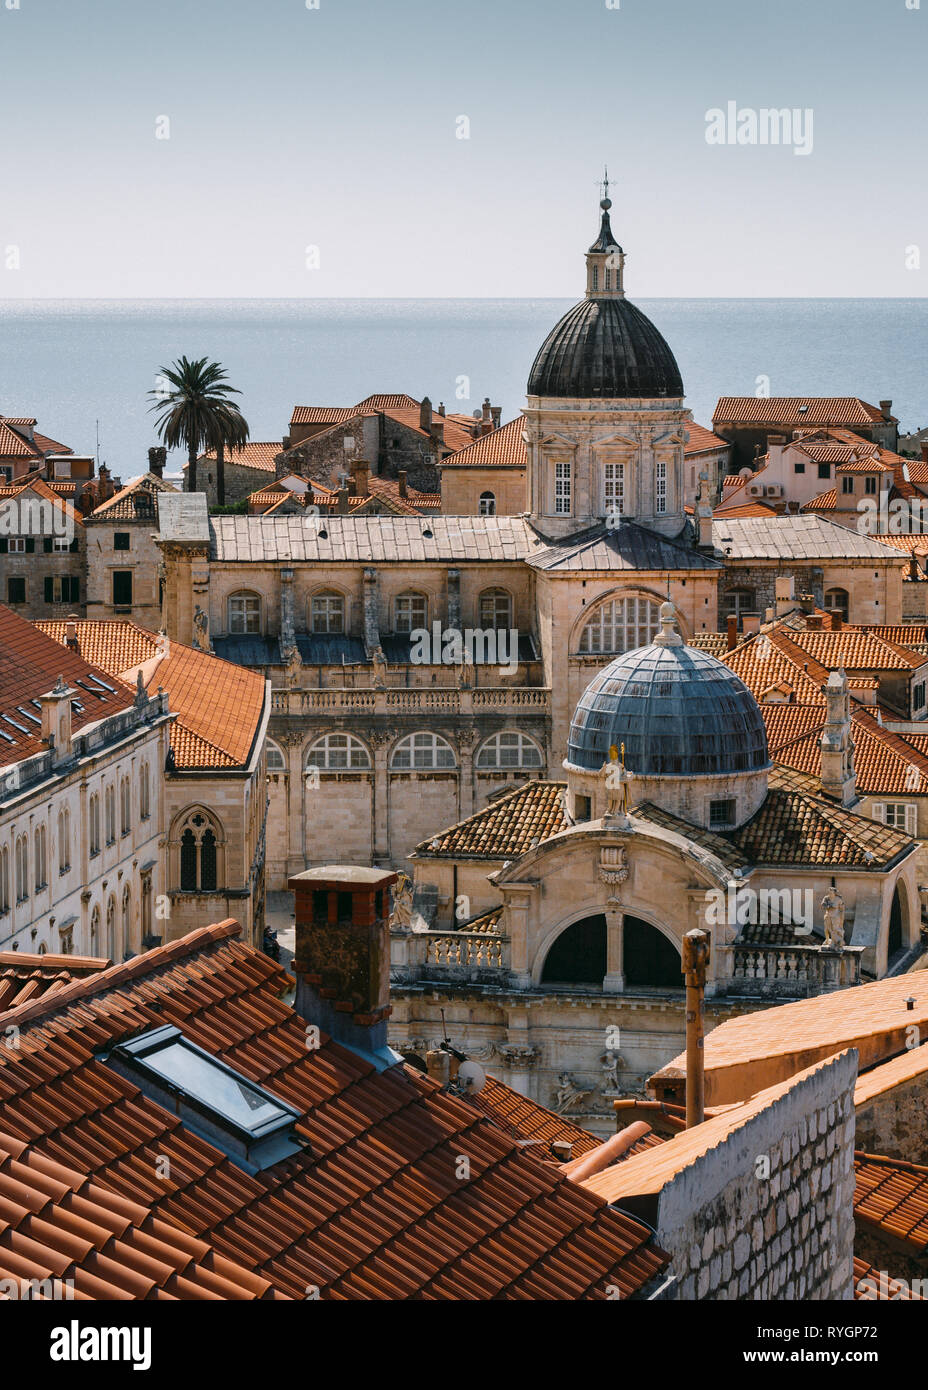 Aerial view of Dubrovnik old town cityscape including the cathedral dome, Dubrovnik, Croatia Stock Photo